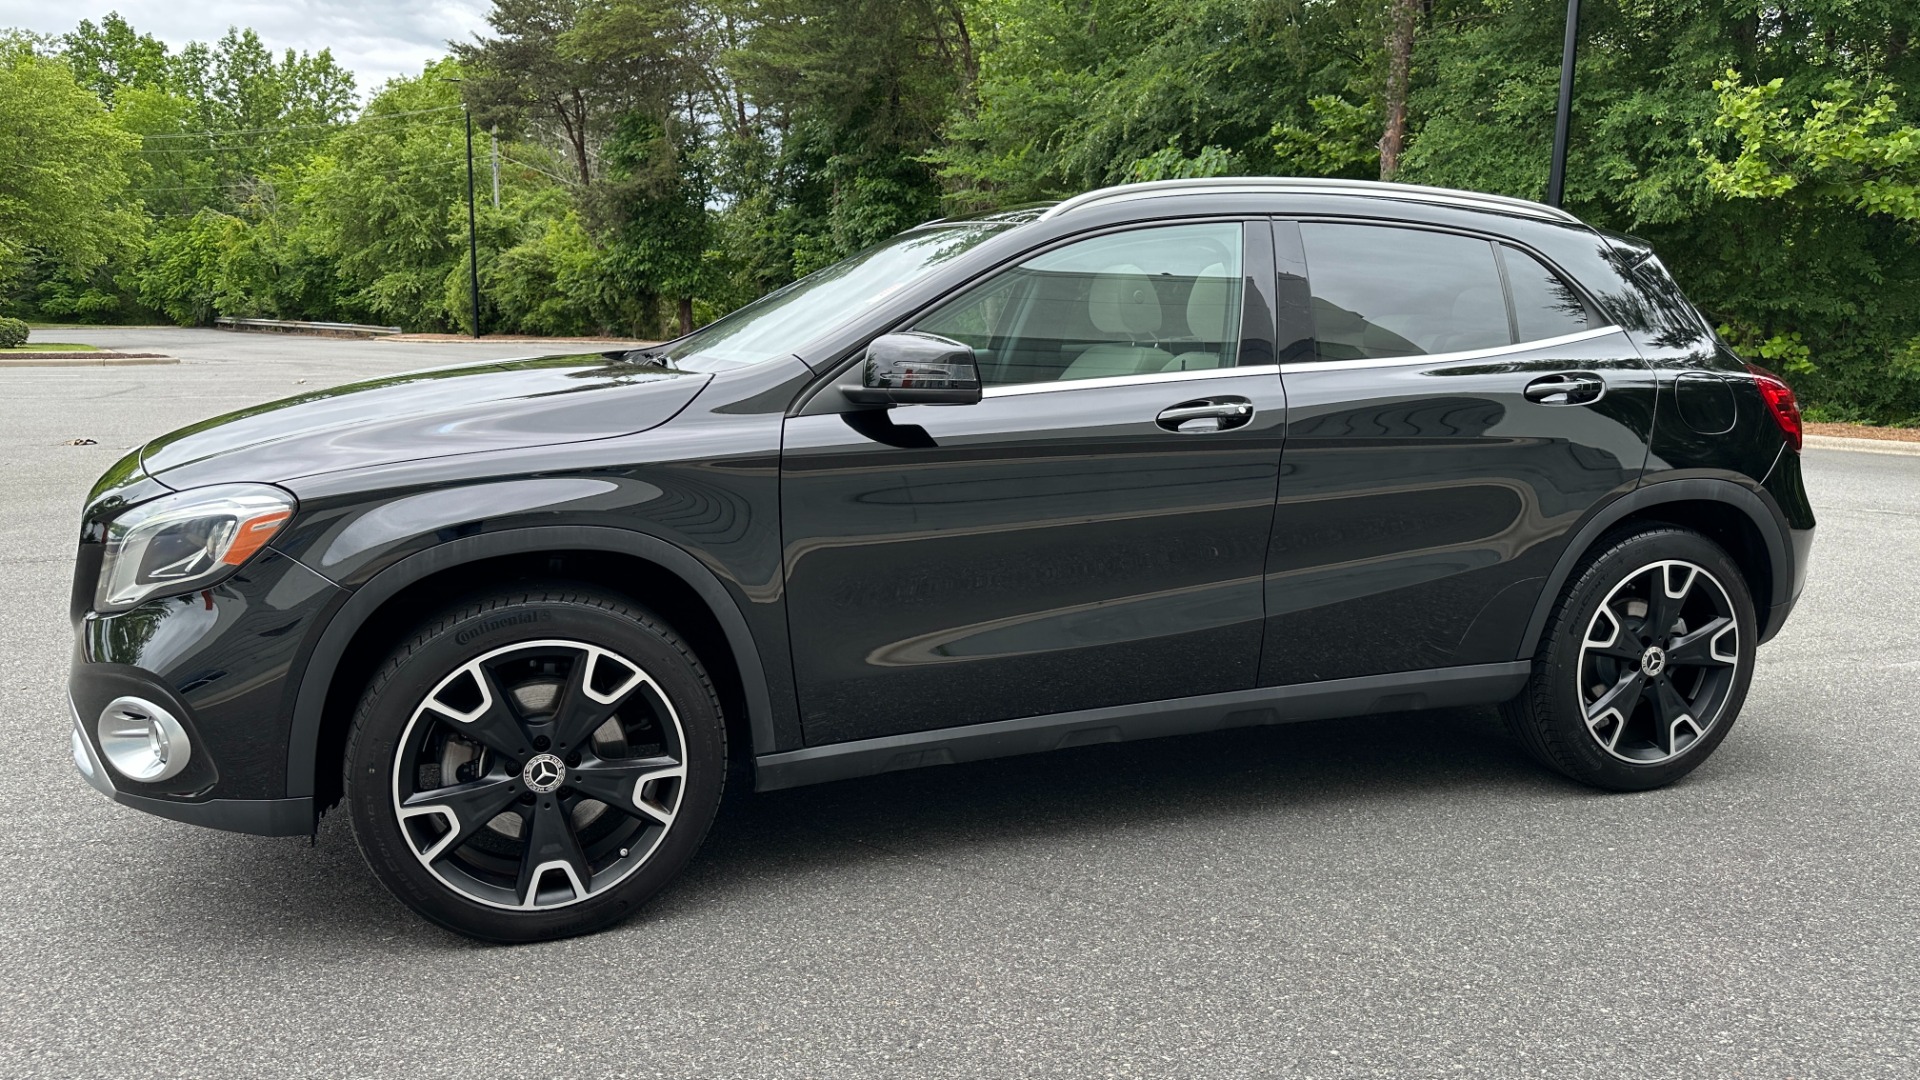 Used 2020 Mercedes-Benz GLA GLA 250 / 19IN WHEELS / WOOD TRIM / CONVENIENCE / PREMIUM for sale $30,995 at Formula Imports in Charlotte NC 28227 6